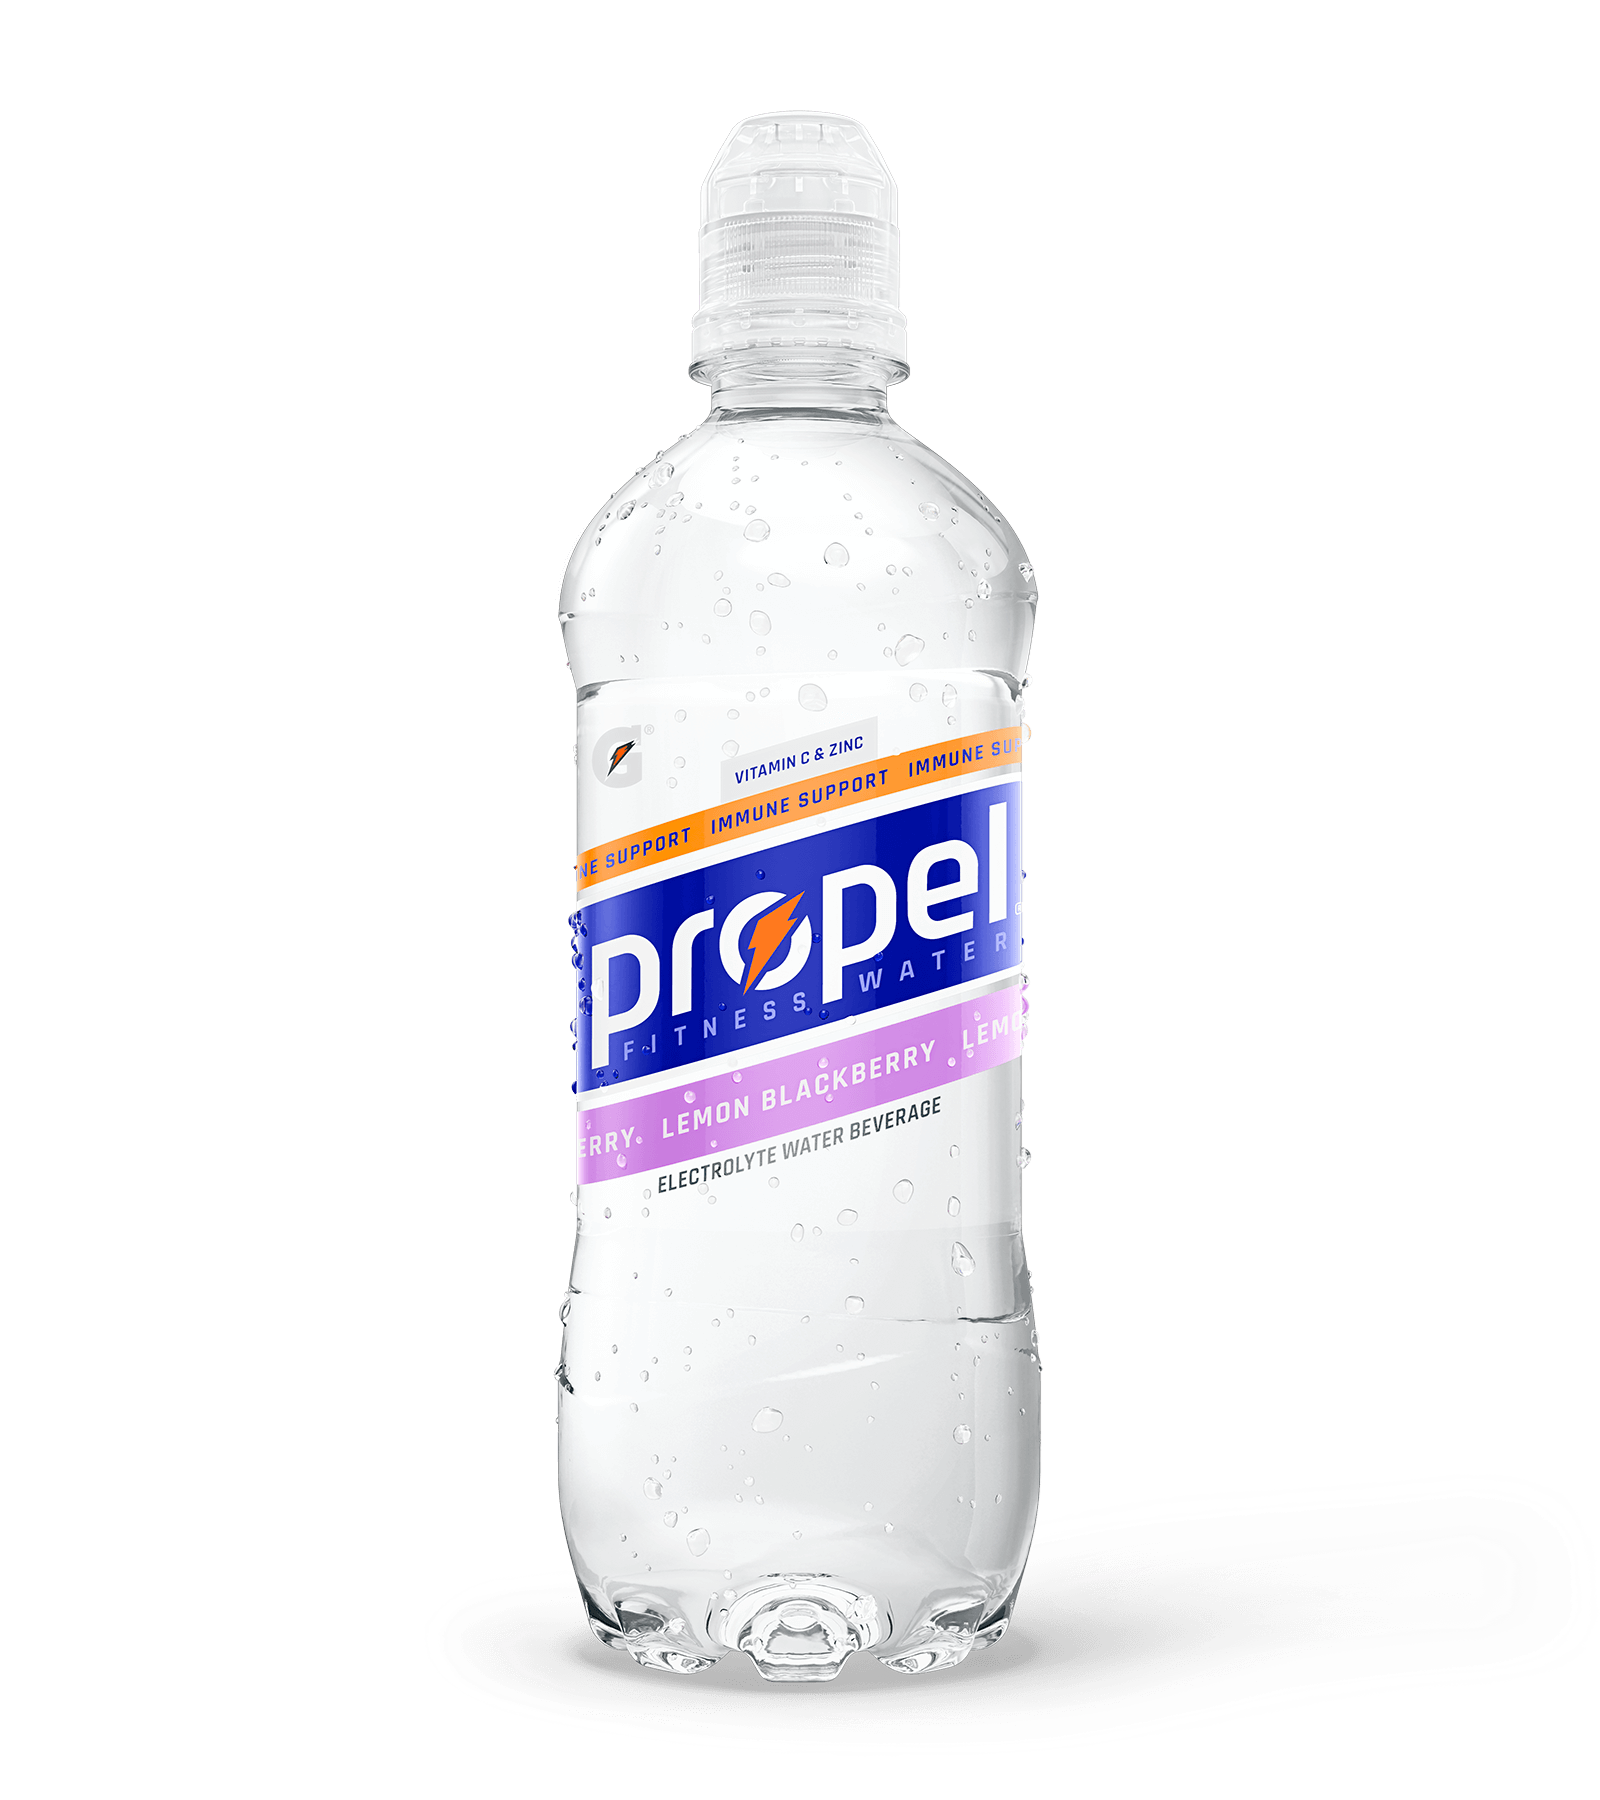 Propel Fitness Water and Michael B. Jordan Launch Propel Your